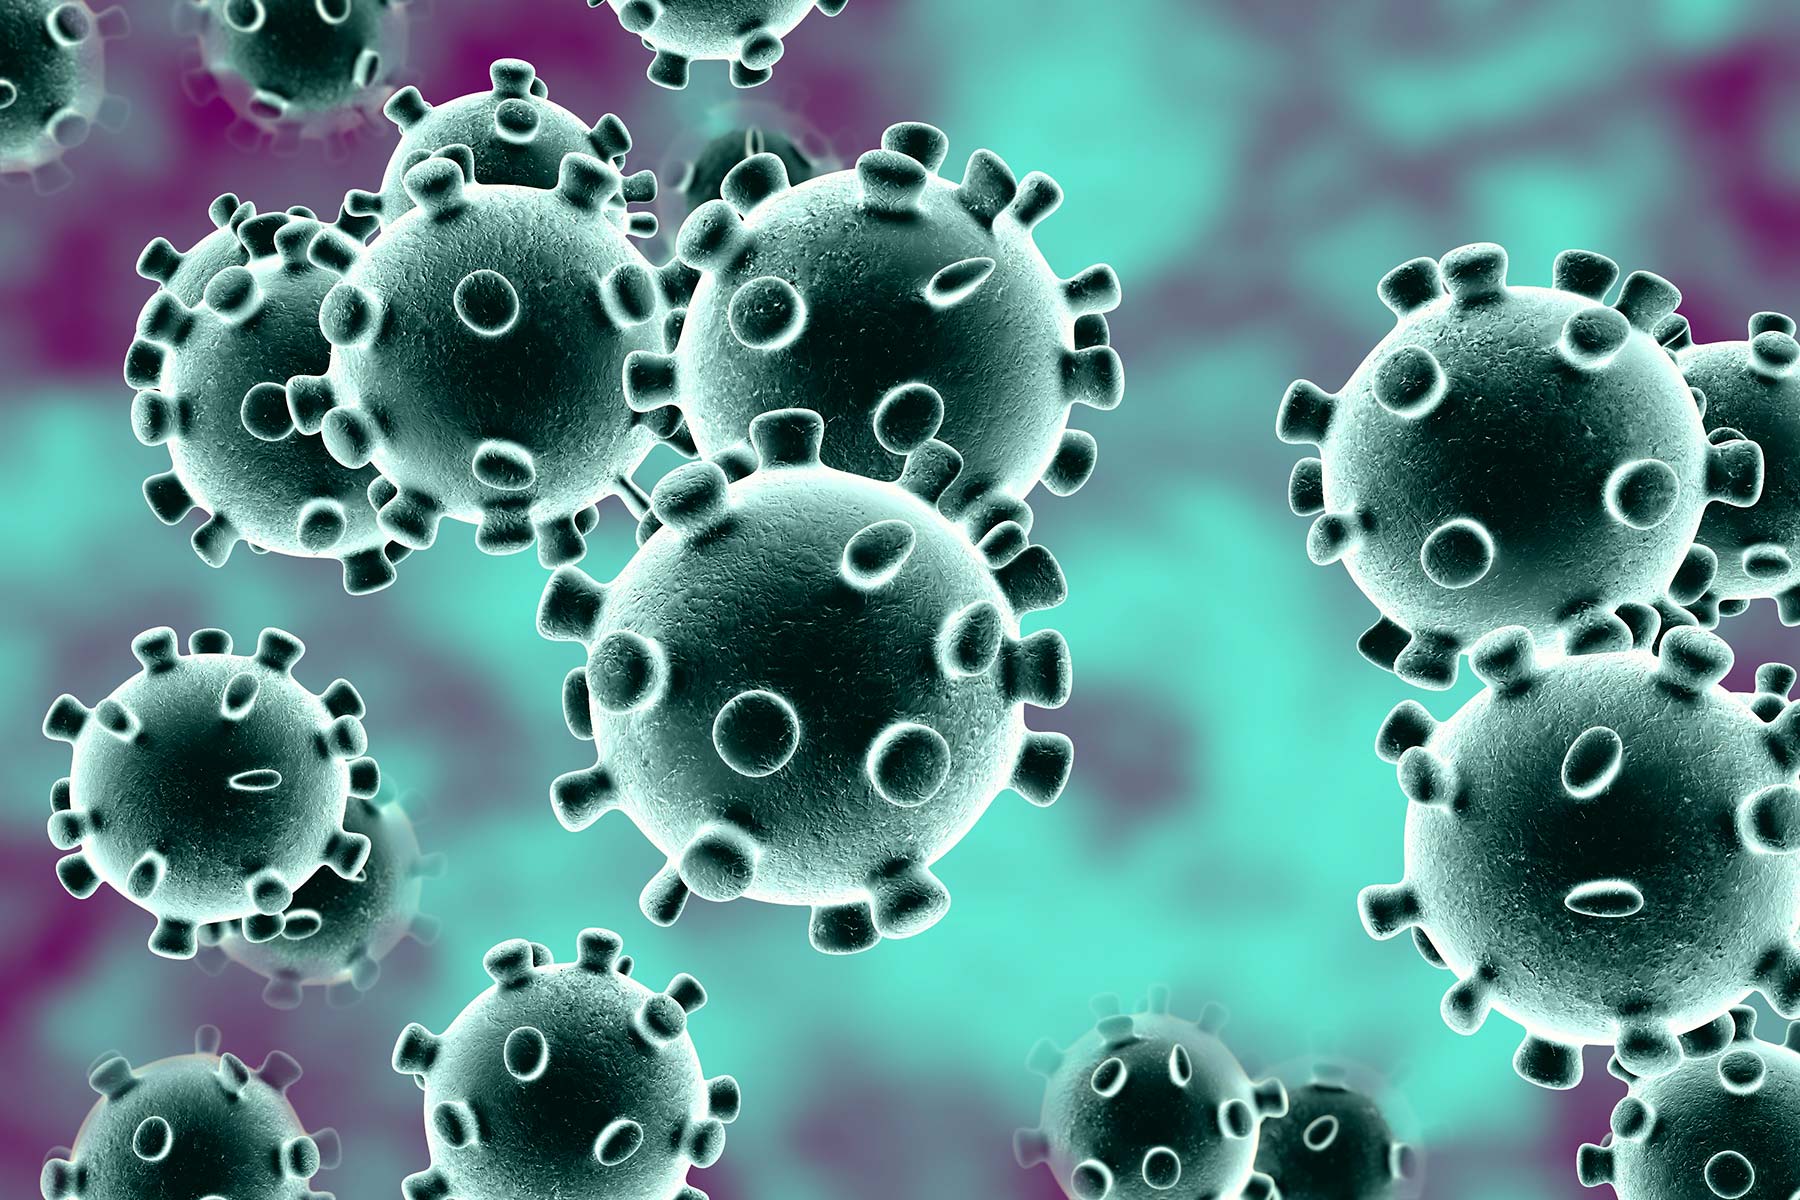 Coronavirus Could Affect Business and Activities in Las Vegas